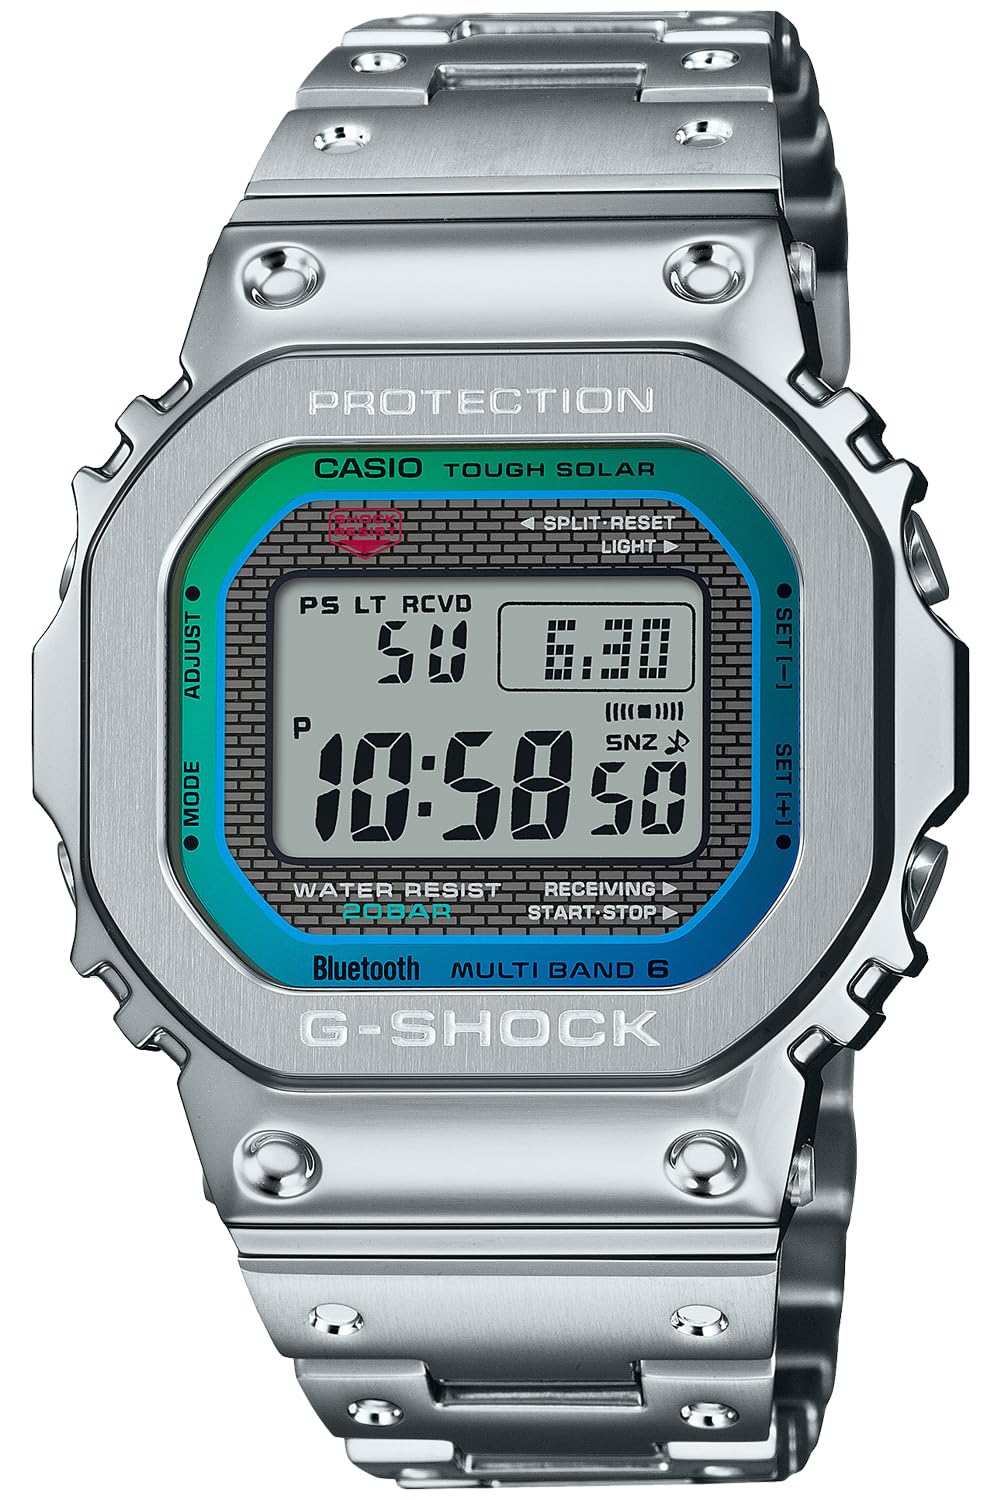 Casio G-Shock GMW-B5000 Series Wristwatch, Equipped with Bluetooth, Radio Solar, Silver/Blue Green (Stainless Steel) Japan Import New